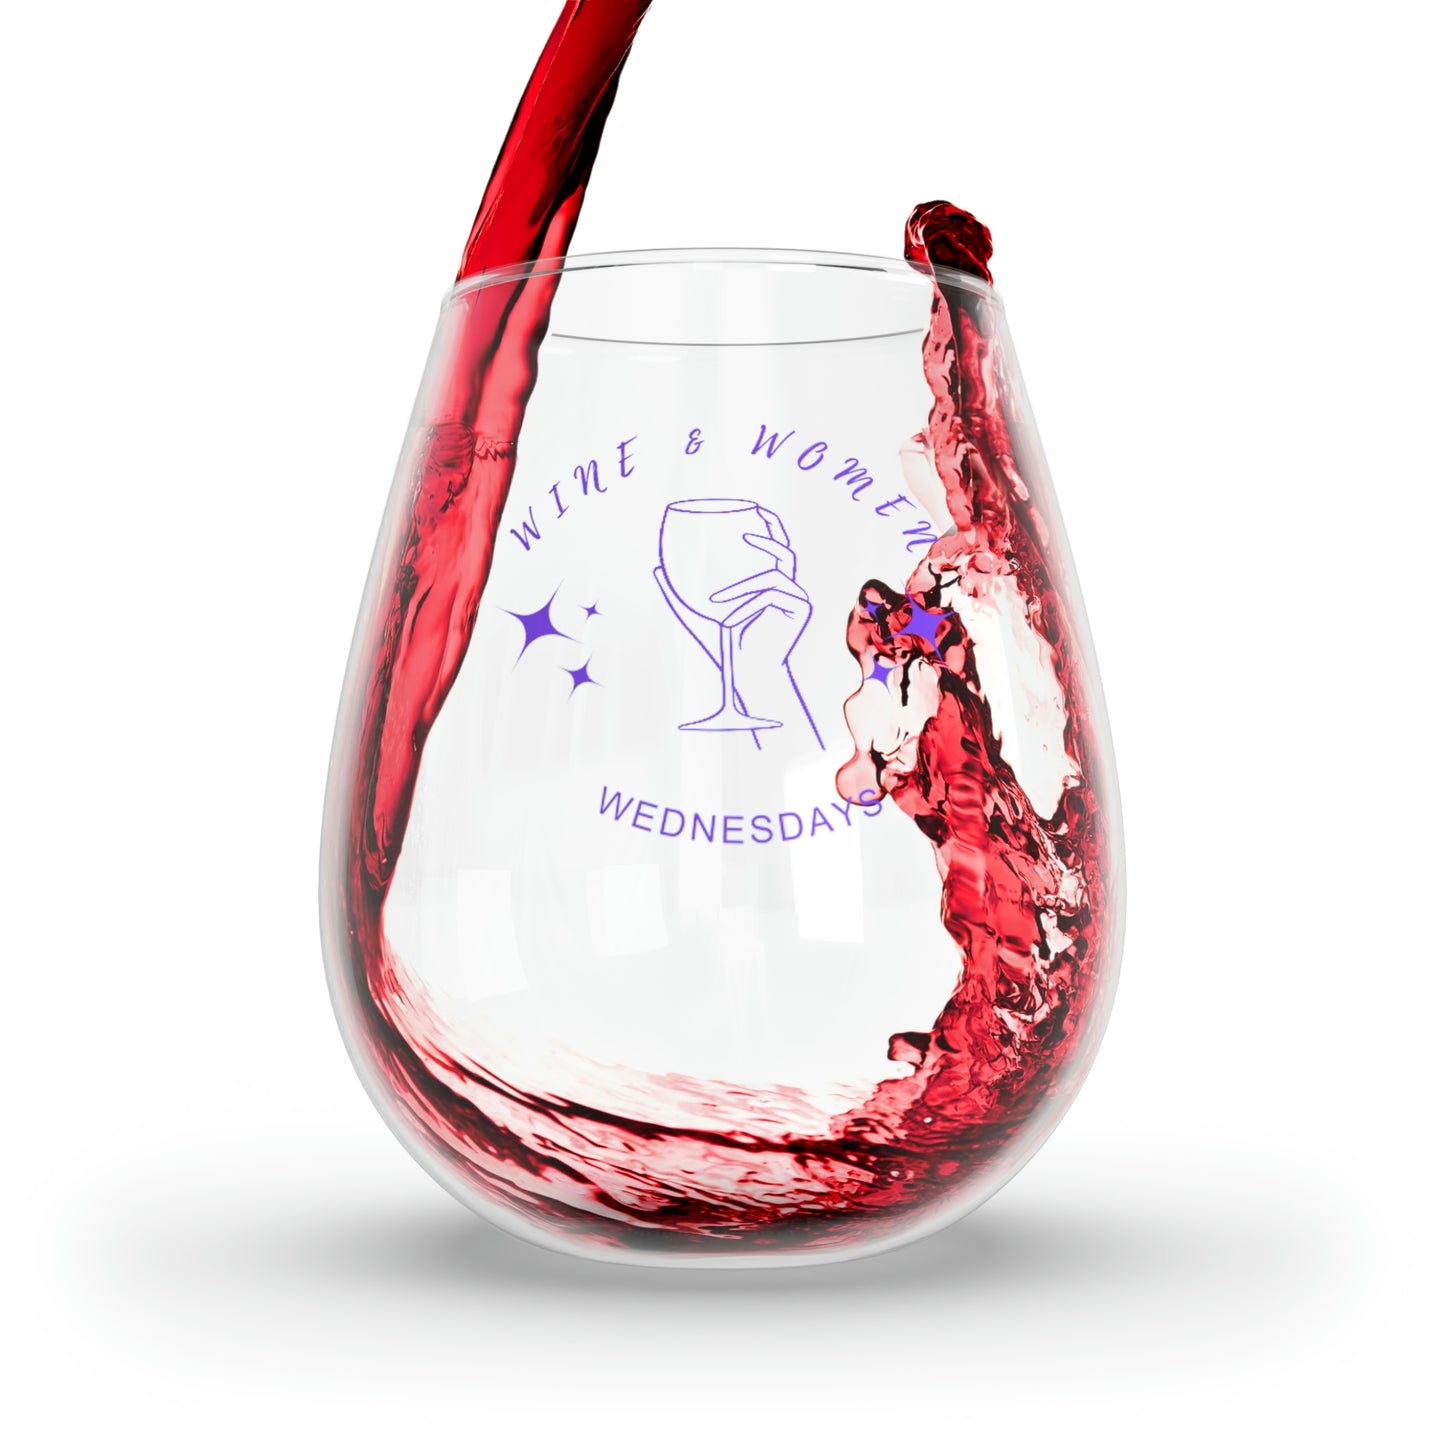 SPECIAL REQUEST ORDER: (script font) Wine and Women Wednesdays - Stemless Wine Glass, 11.75oz